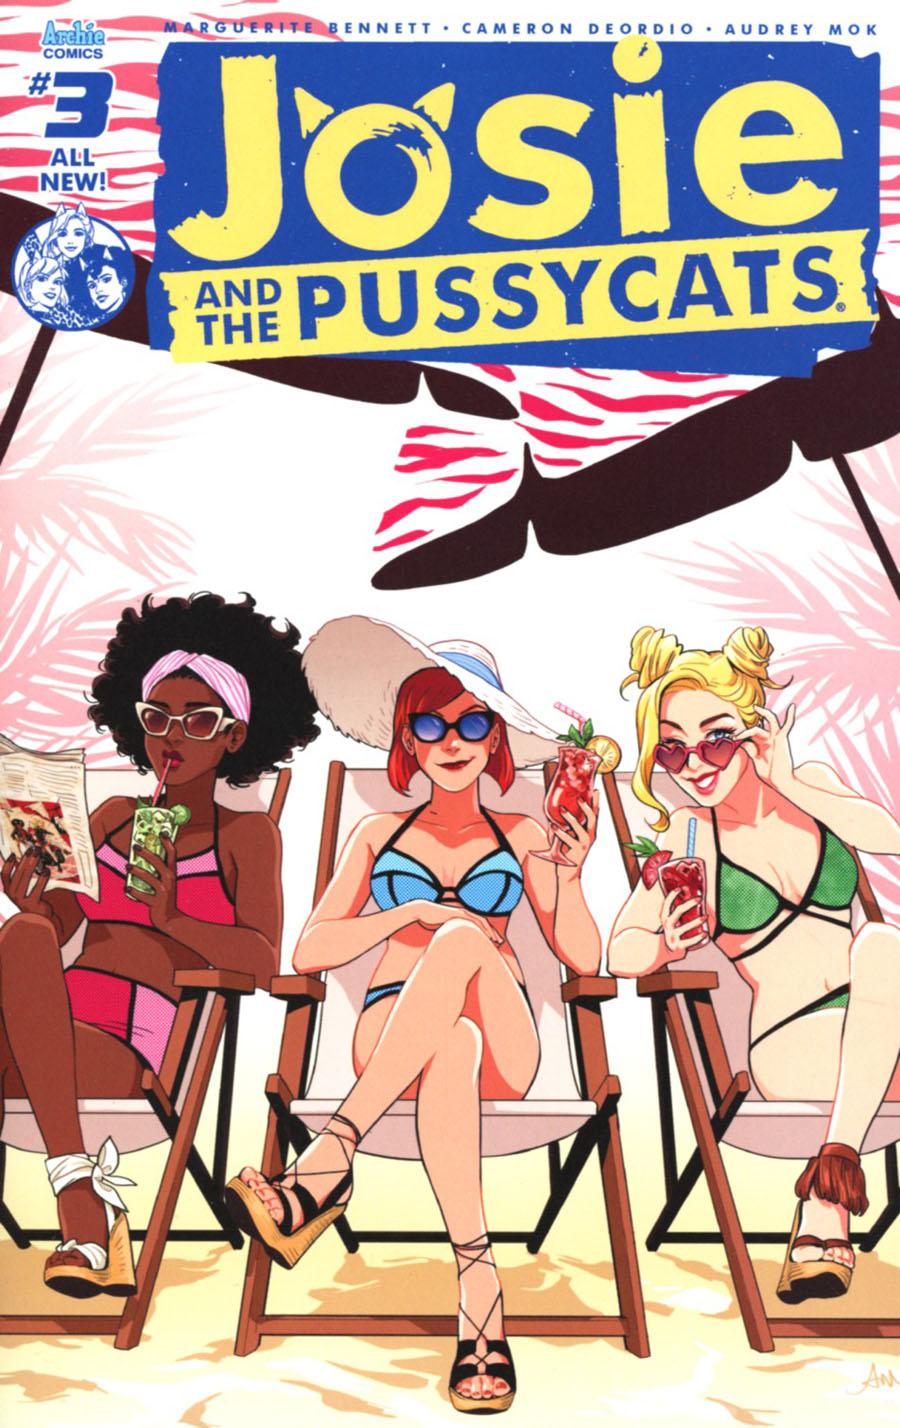 Josie And The Pussycats Vol. 2 #3